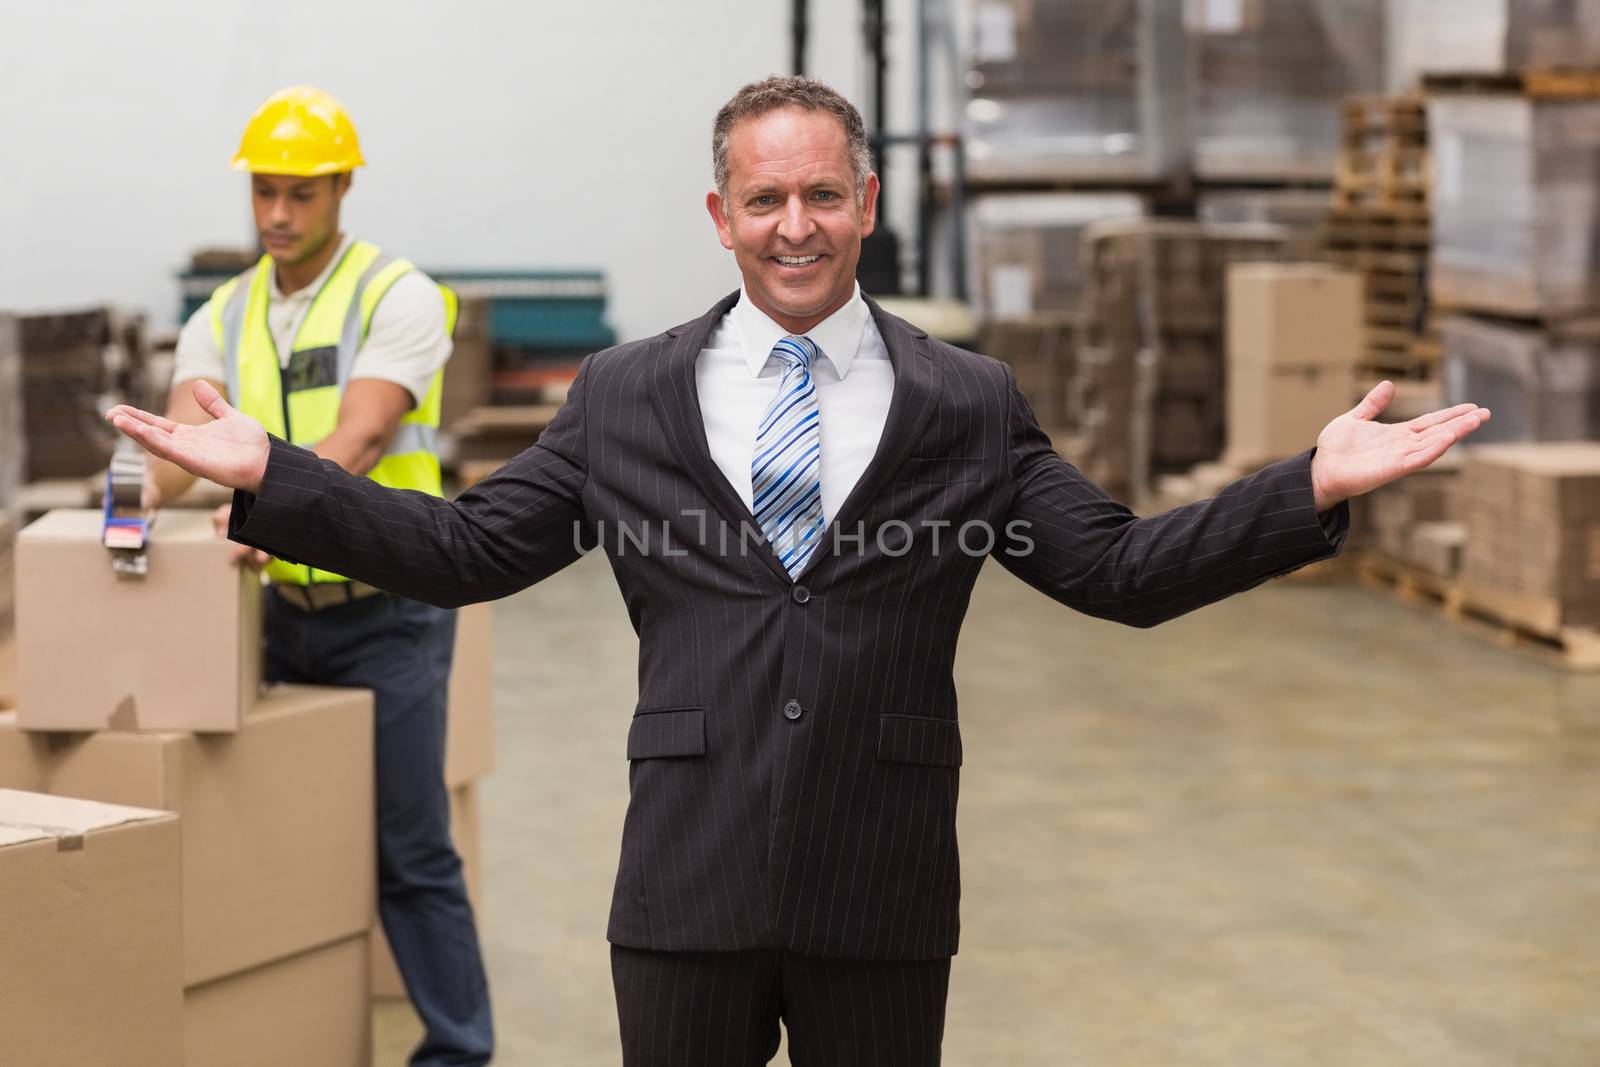 Smiling boss with hands out in a large warehouse